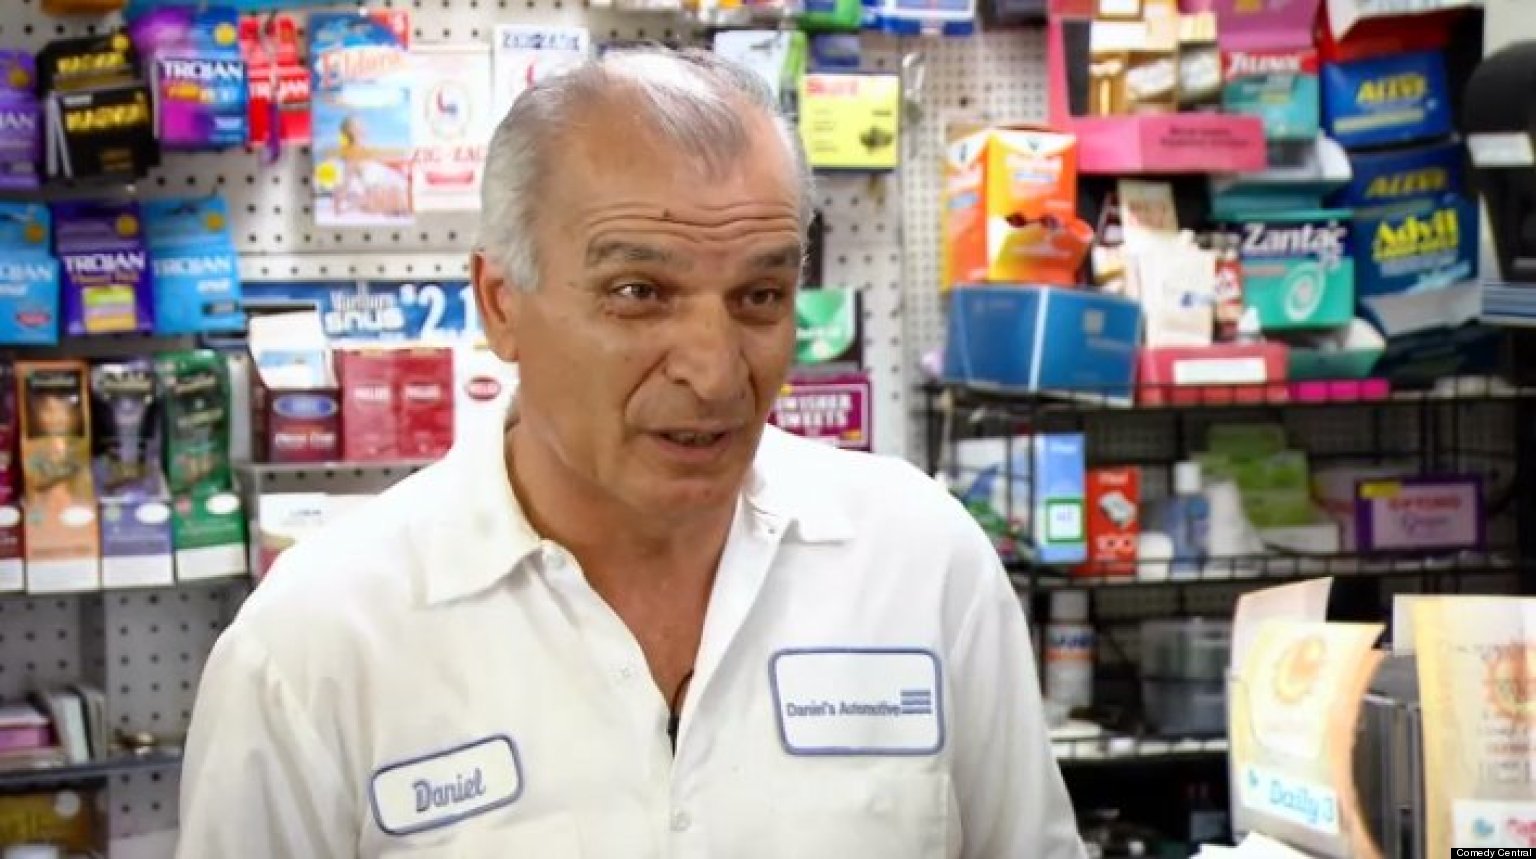 nathan-for-you-gas-station-owner-talks-about-drinking-grandson-s-pee